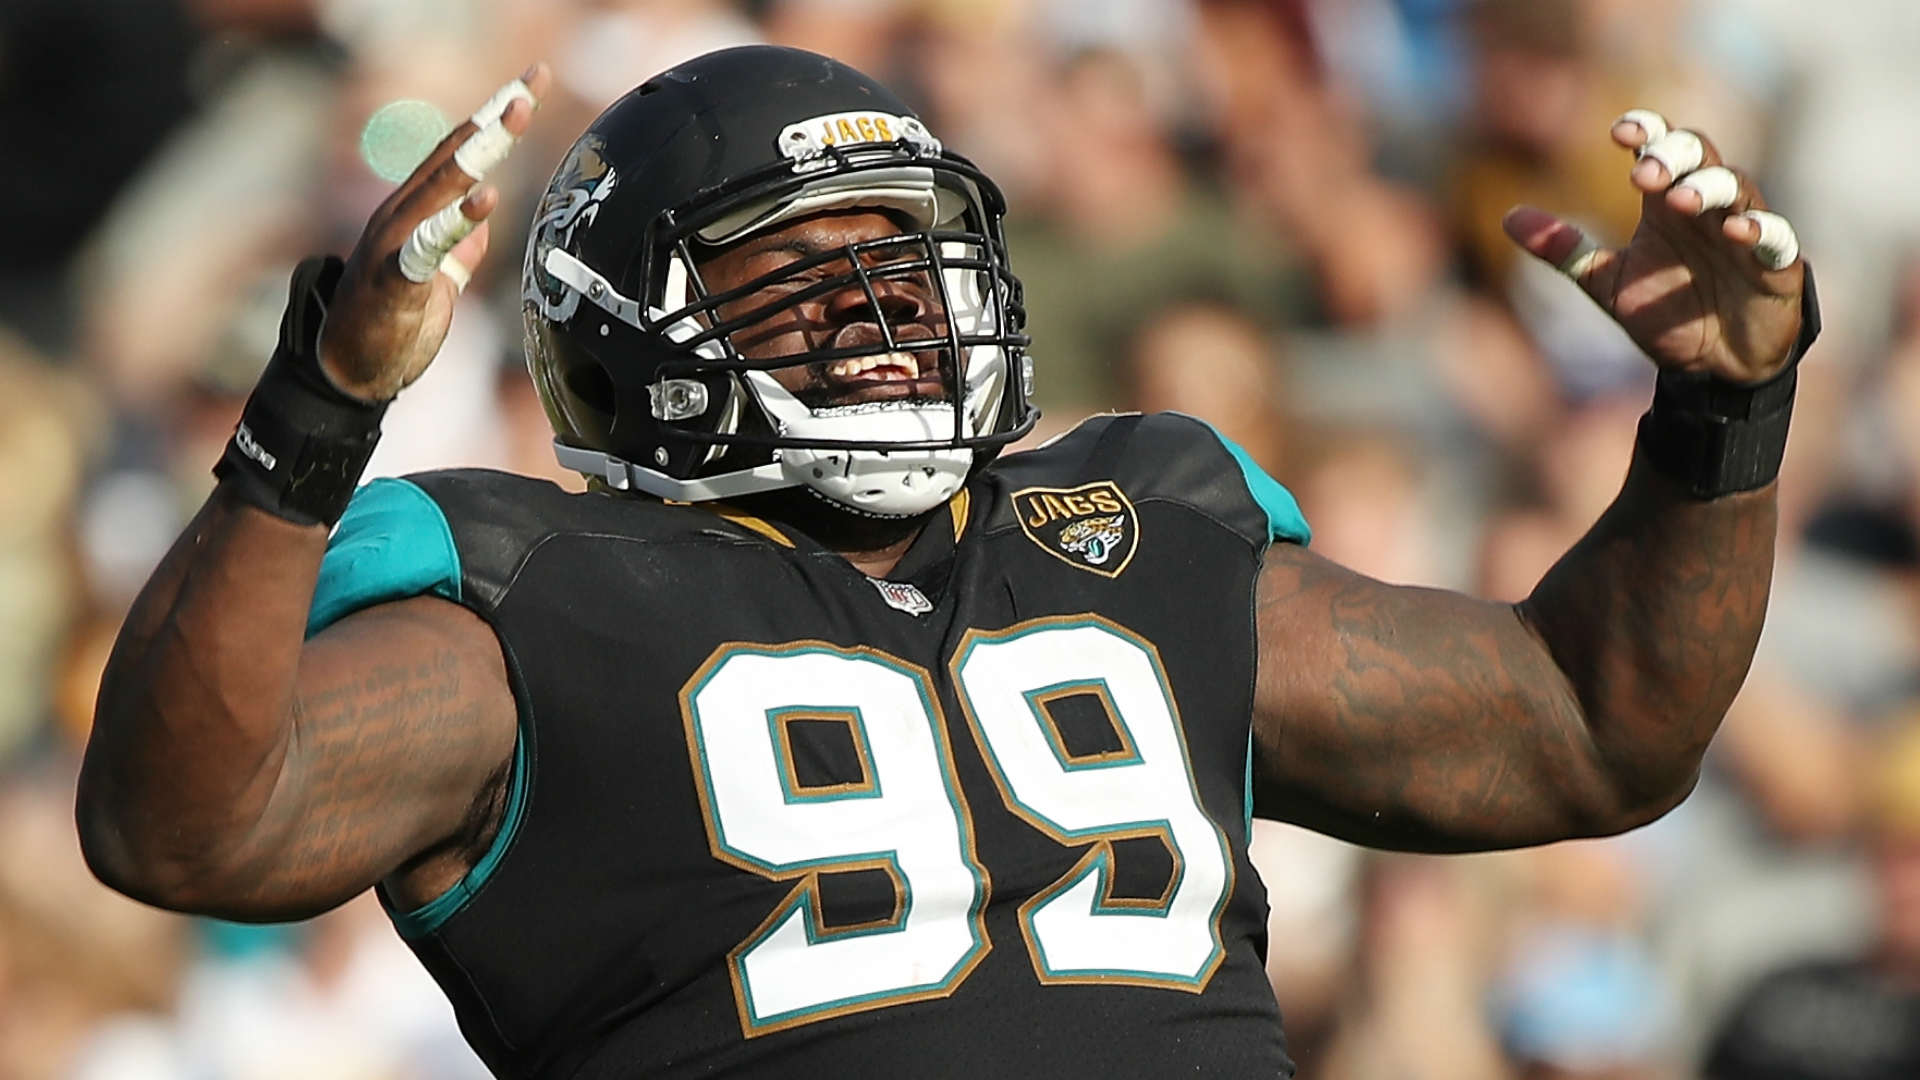 Marcell Dareus injury update: Jaguars defensive tackle will miss 4-6 weeks after core surgery